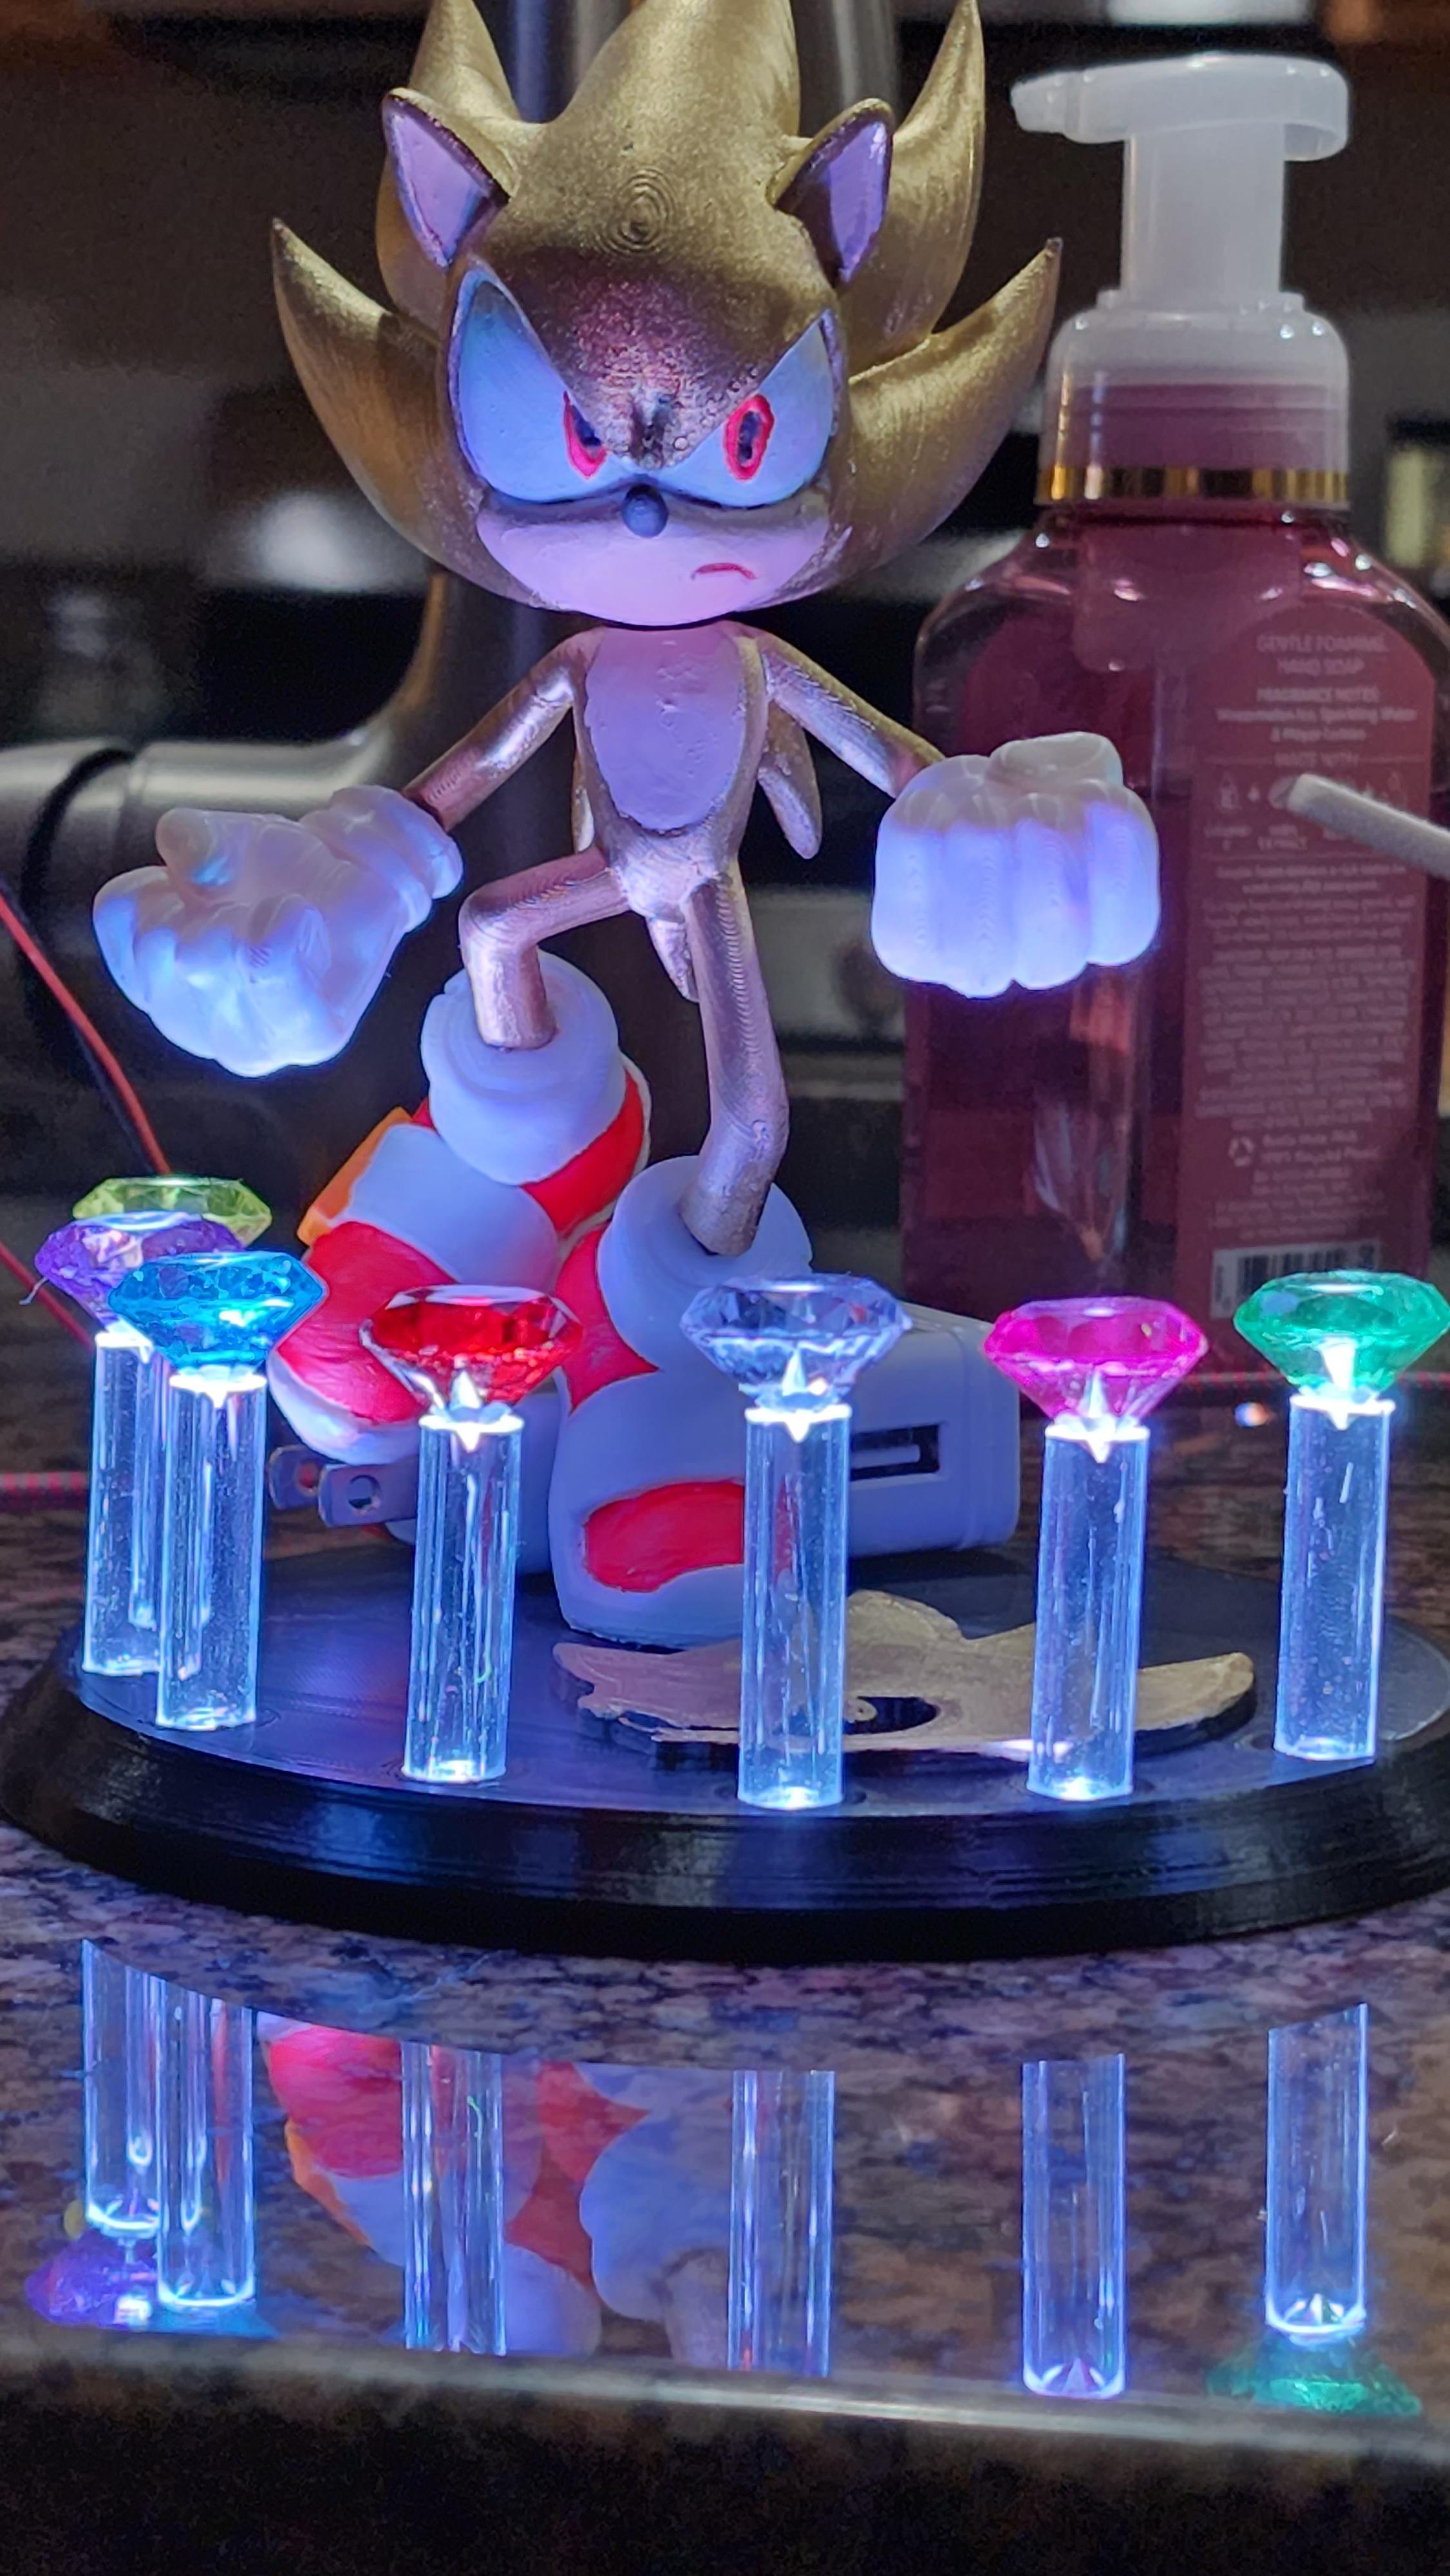 Super Sonic  - Modified the base to allow for 7 acrylic tubes to hold "Chaos Emeralds" that could be lit using WS2812 (aka NeoPixel) LEDs with an Arduino. - 3d model